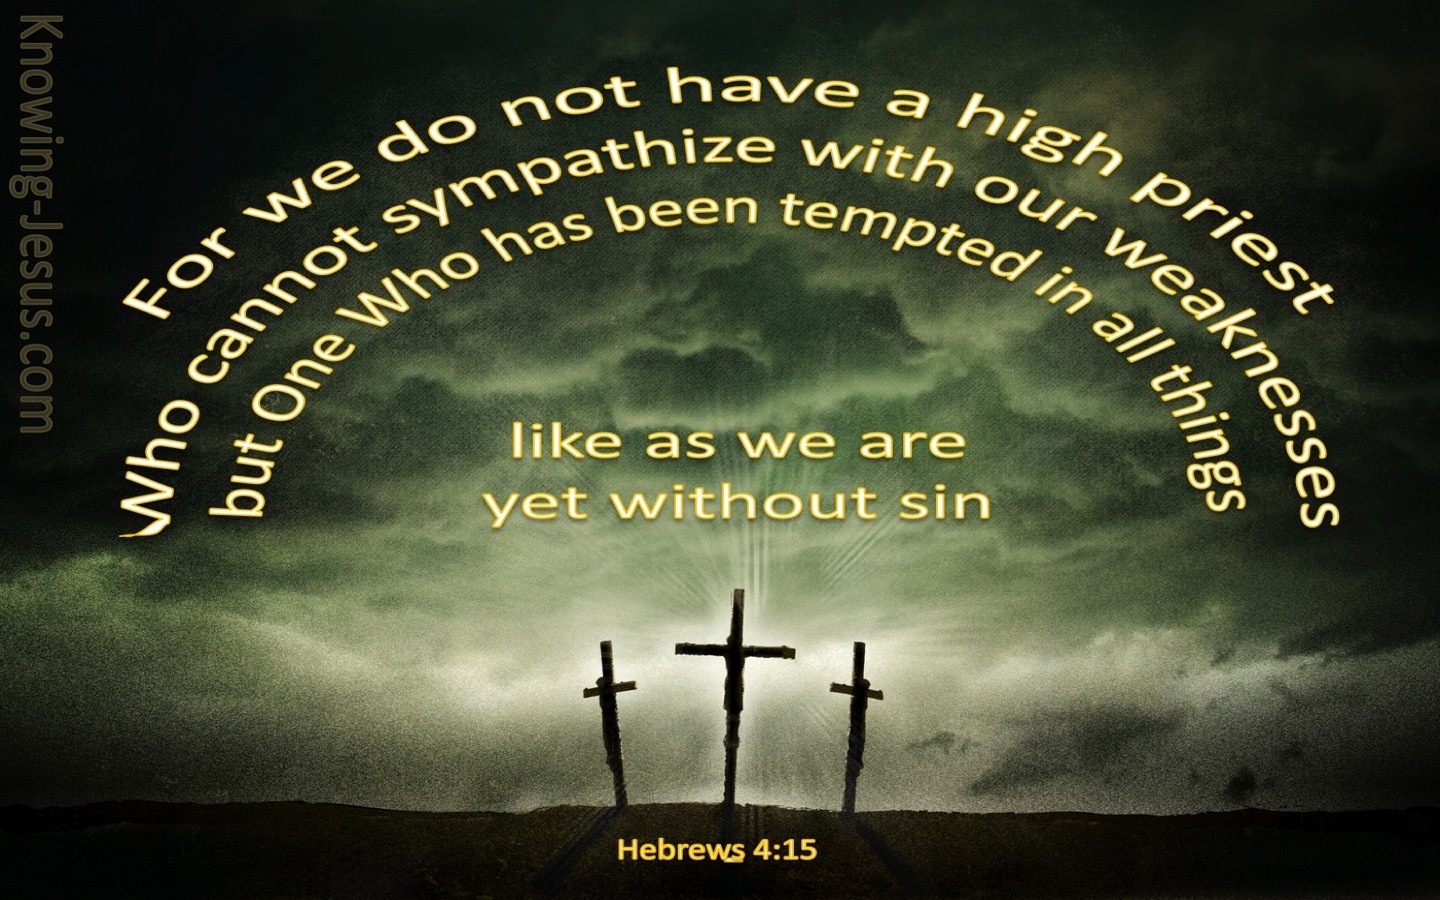 Hebrews 4:15 Jesus Our Great High Priest (yellow)